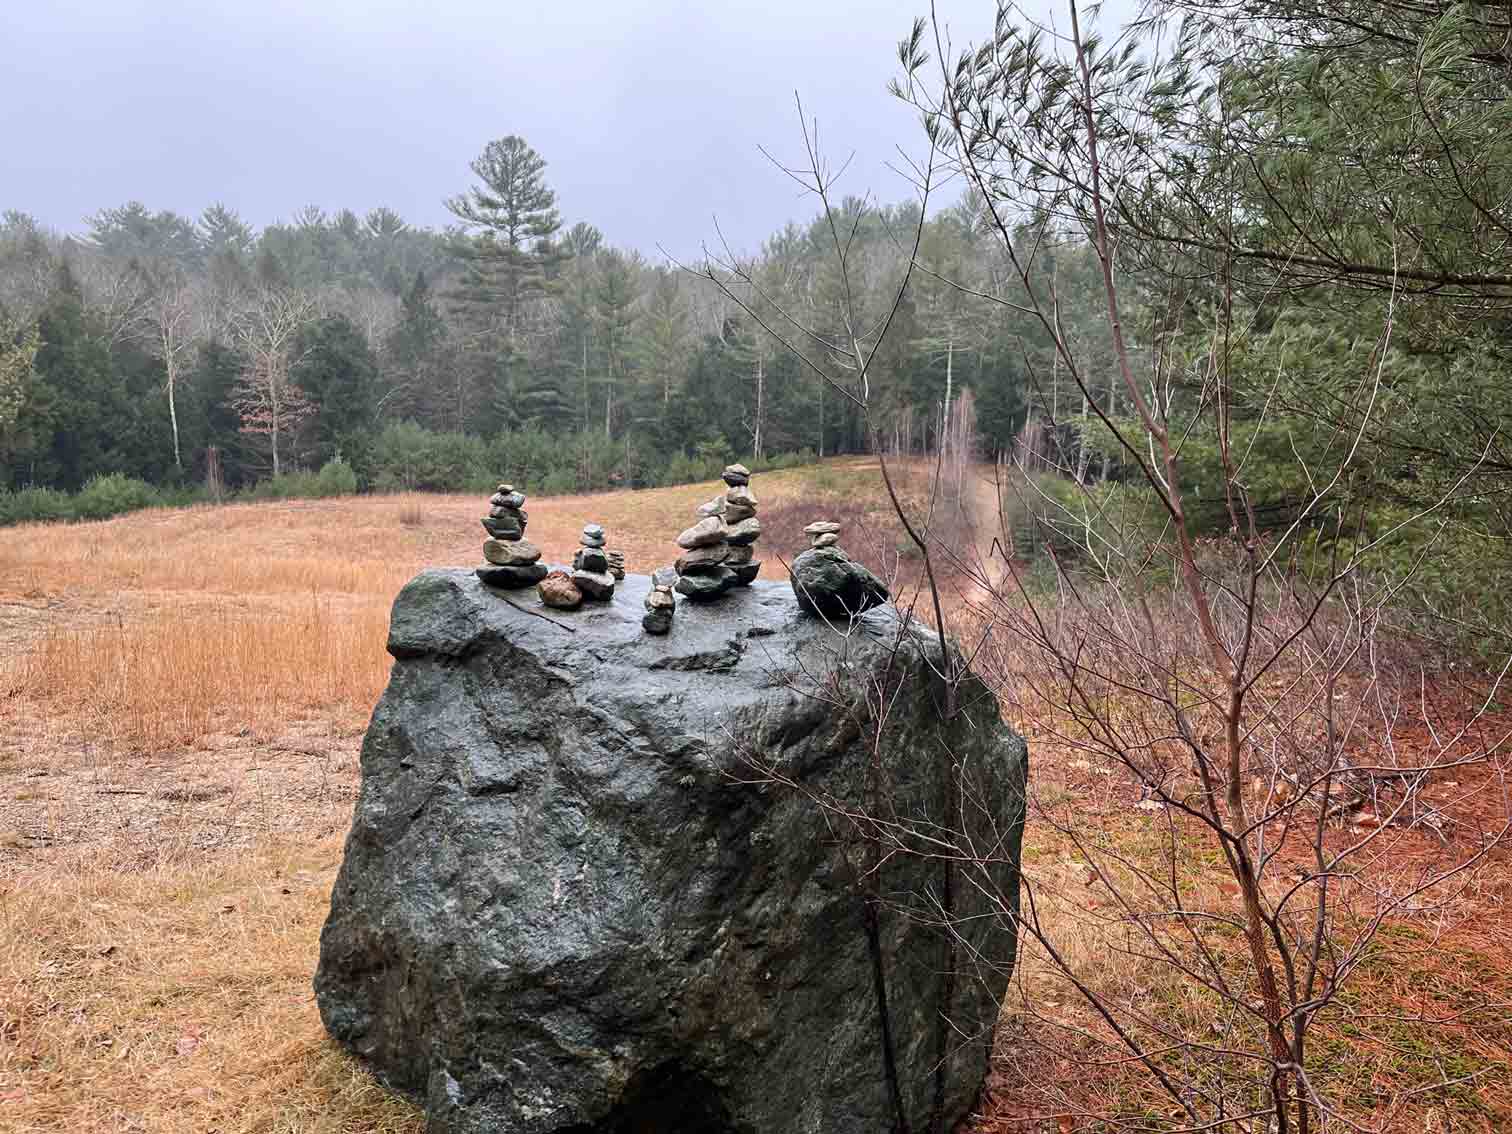 At the Robbins Preserve - Large glacial erratic with little cairns on top.